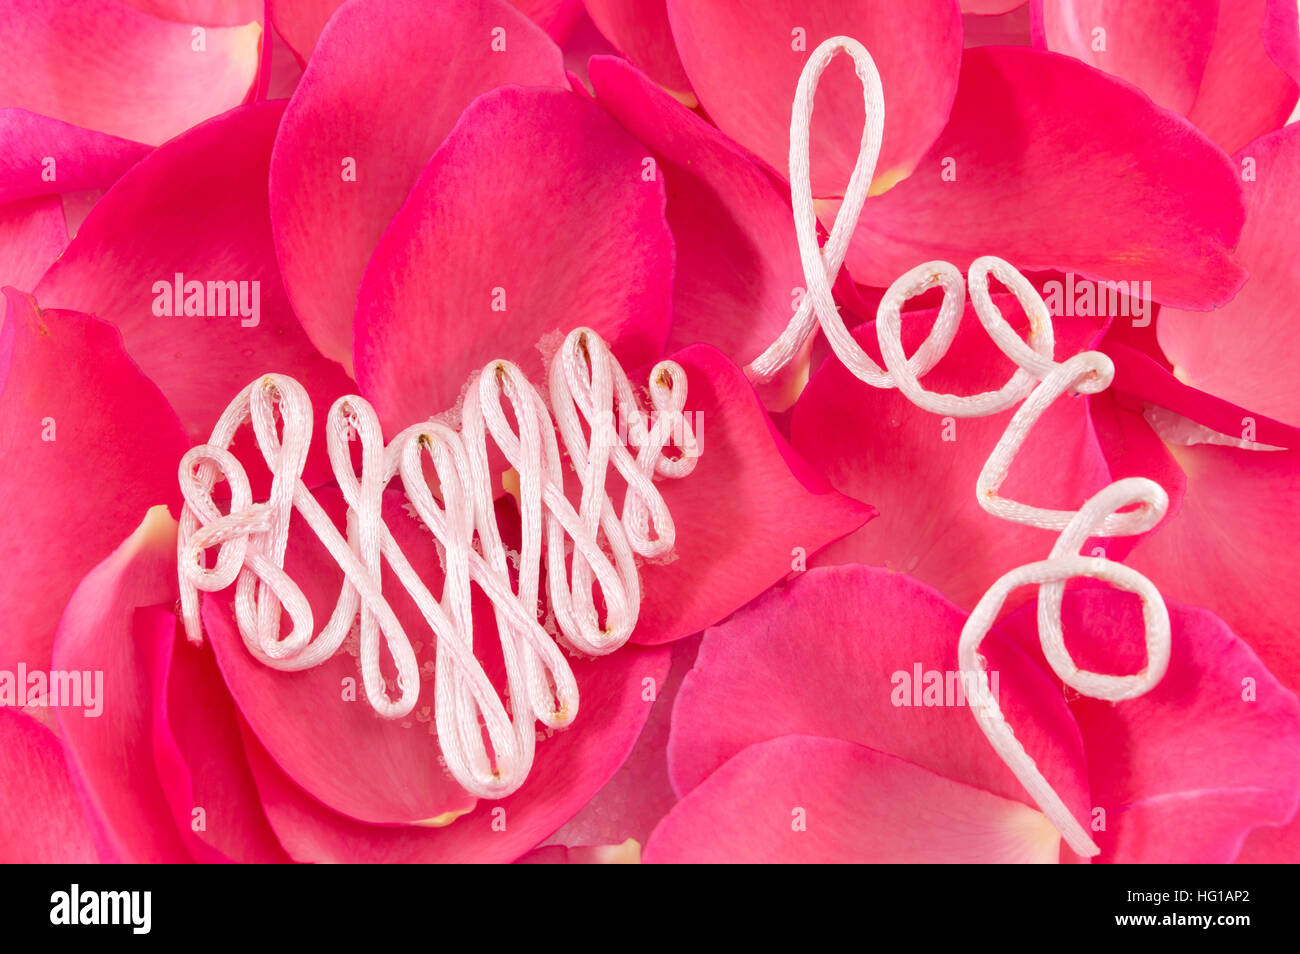 Word love made out of thread on red rose petals Stock Photo